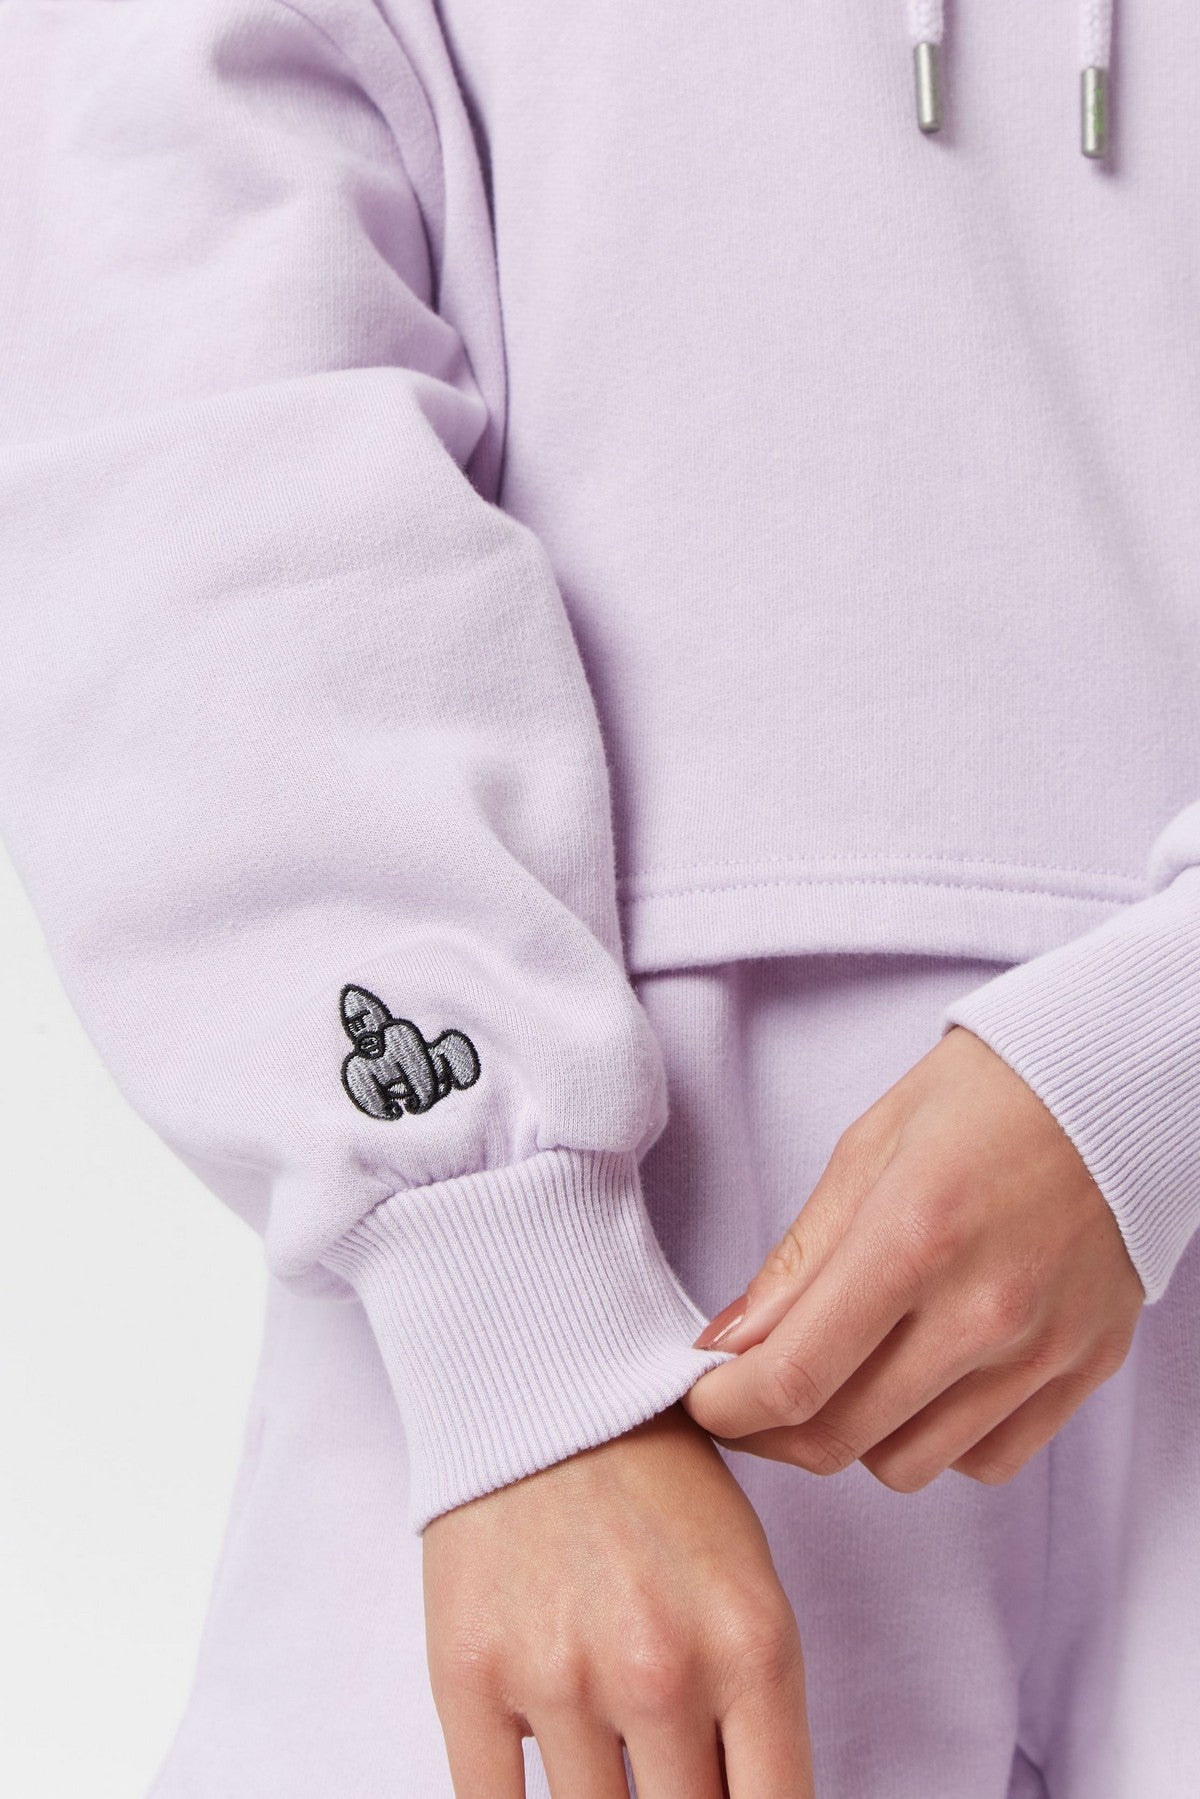 MAJI 'G' COLLECTION HOODY - LILAC - THAT GORILLA BRAND